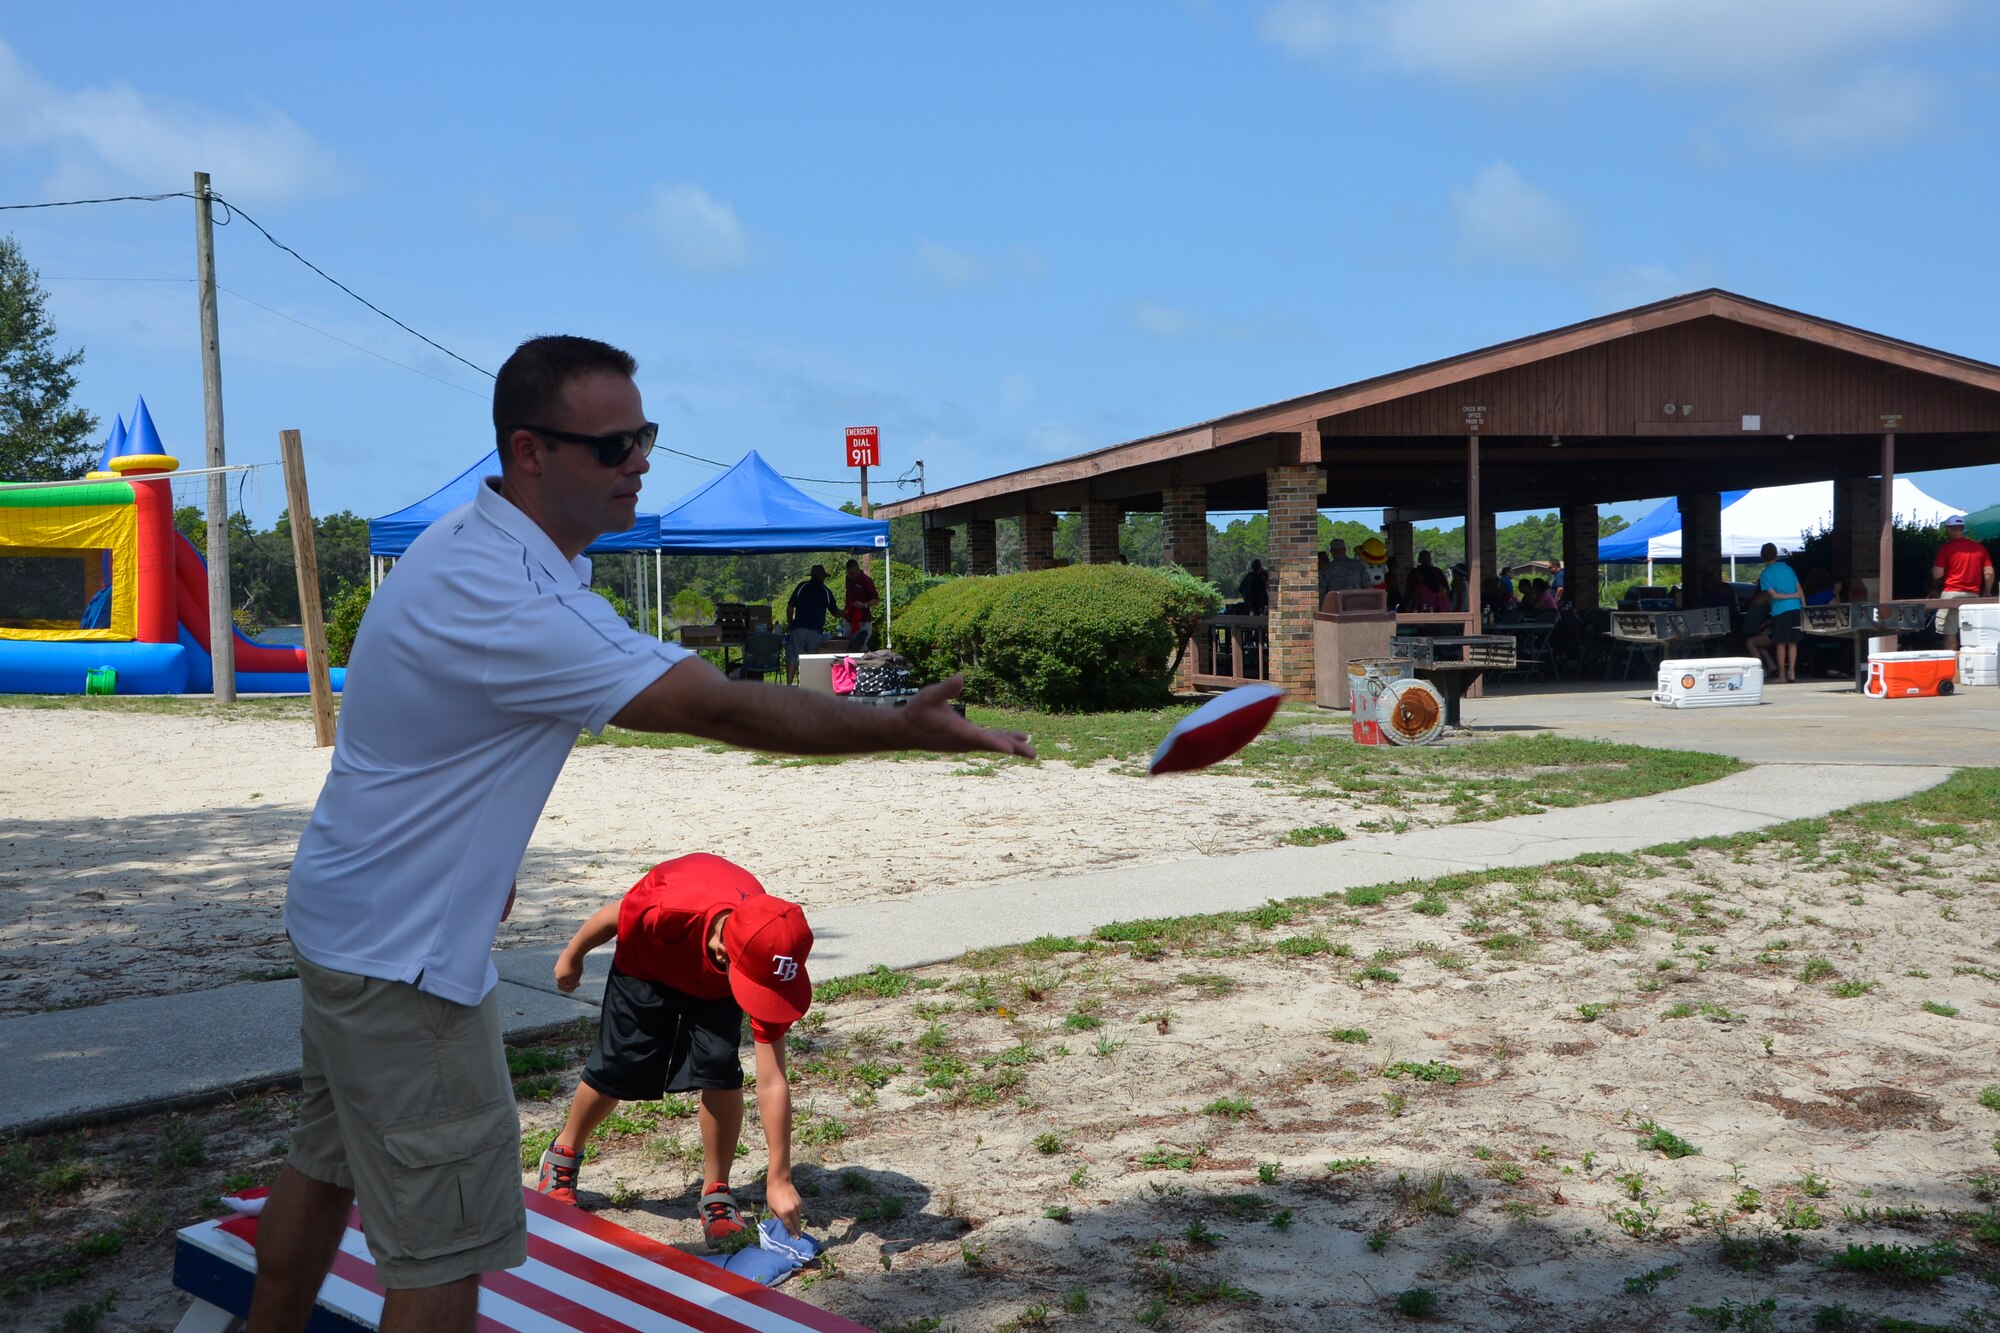 Master Sgt. Robert Arthur, executive assistant to the Continental U.S. Aerospace Defense Command – 1st Air Force (Air Forces Northern) Command Chief, tosses a bean bag in the corn hole game during 1st Air Force (Air Forces Northern)’s “Family Day 2015” Aug. 7 at Bonita Bay. The day focused on taking care of the organization’s families and featured a variety of activities that included food and sport competitions, a waterslide and plenty to eat and drink. (Air Force Photo Released/Mary McHale)

